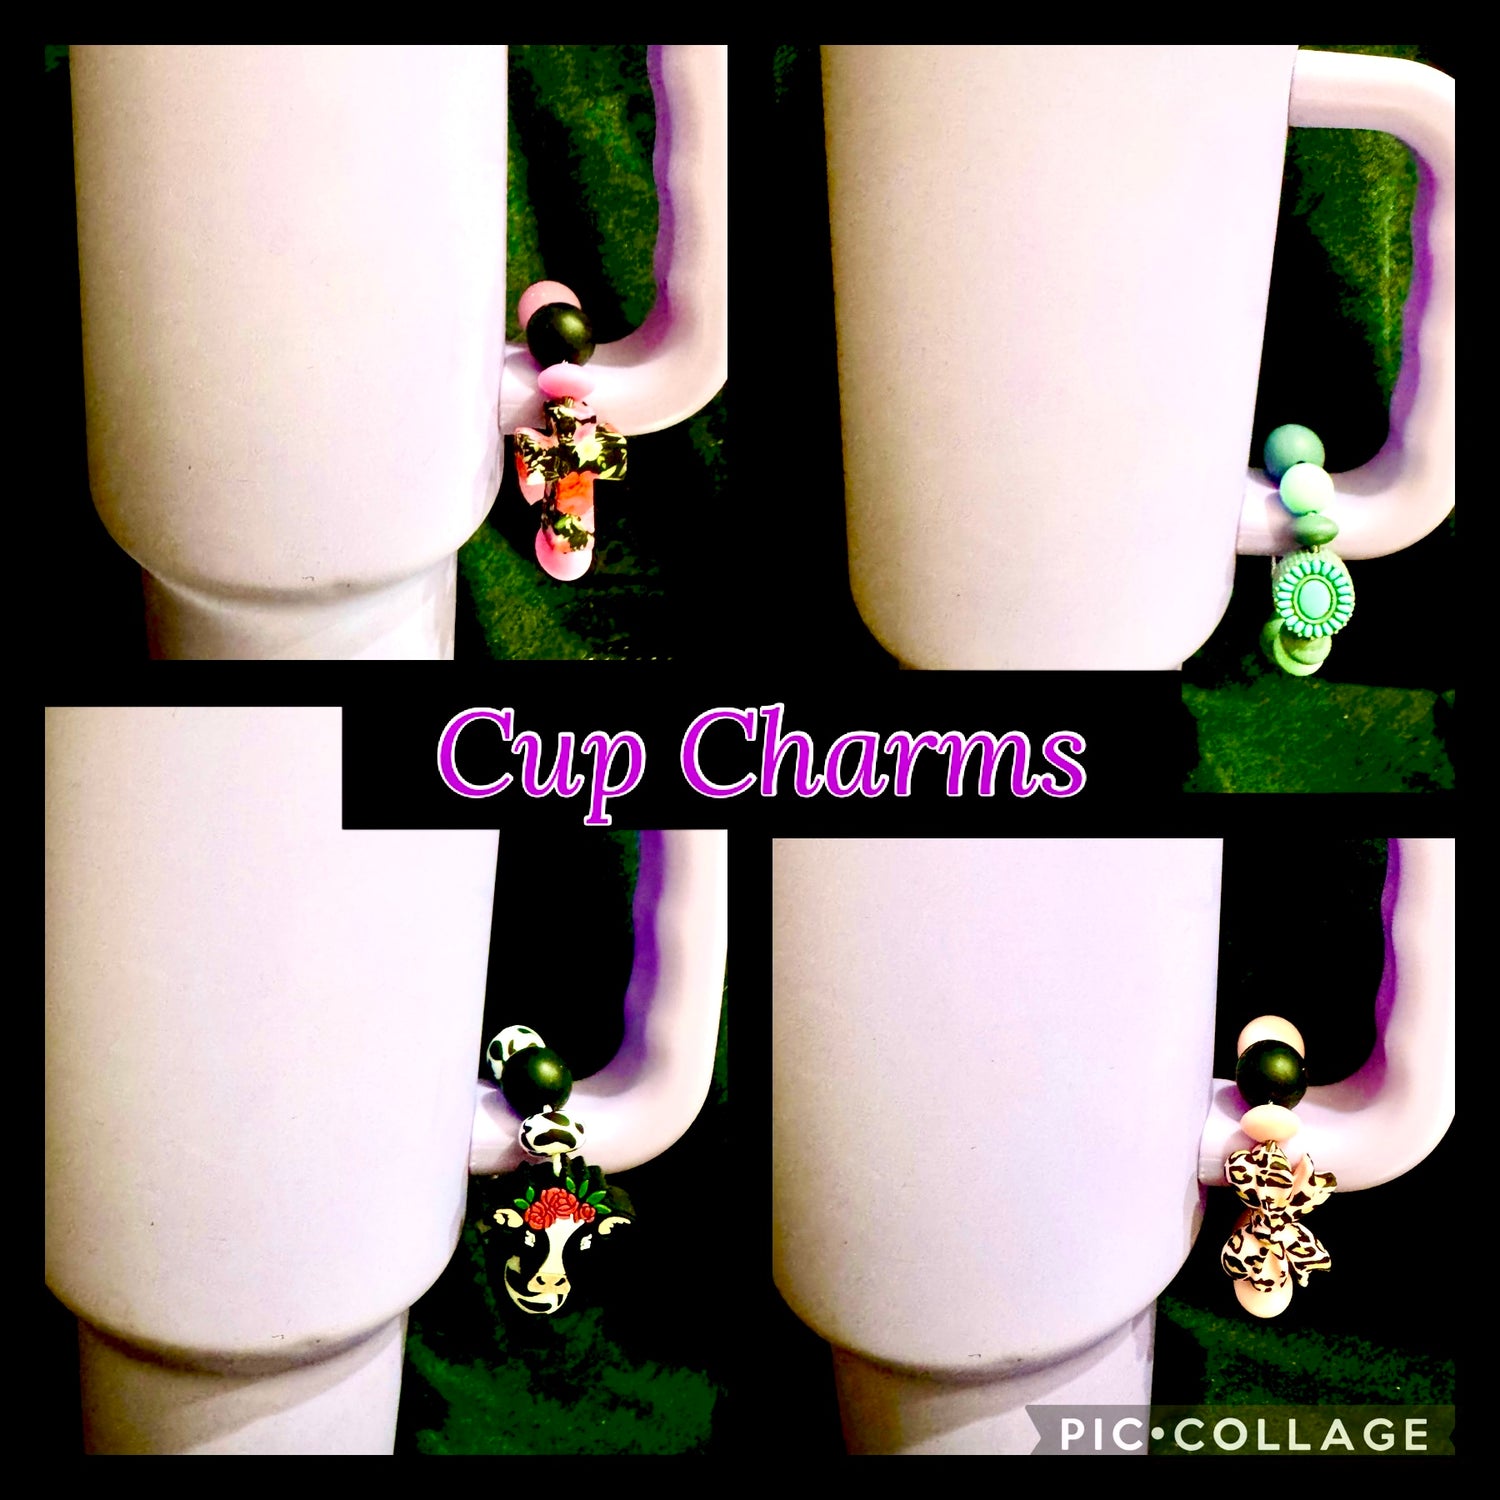 Cup charms